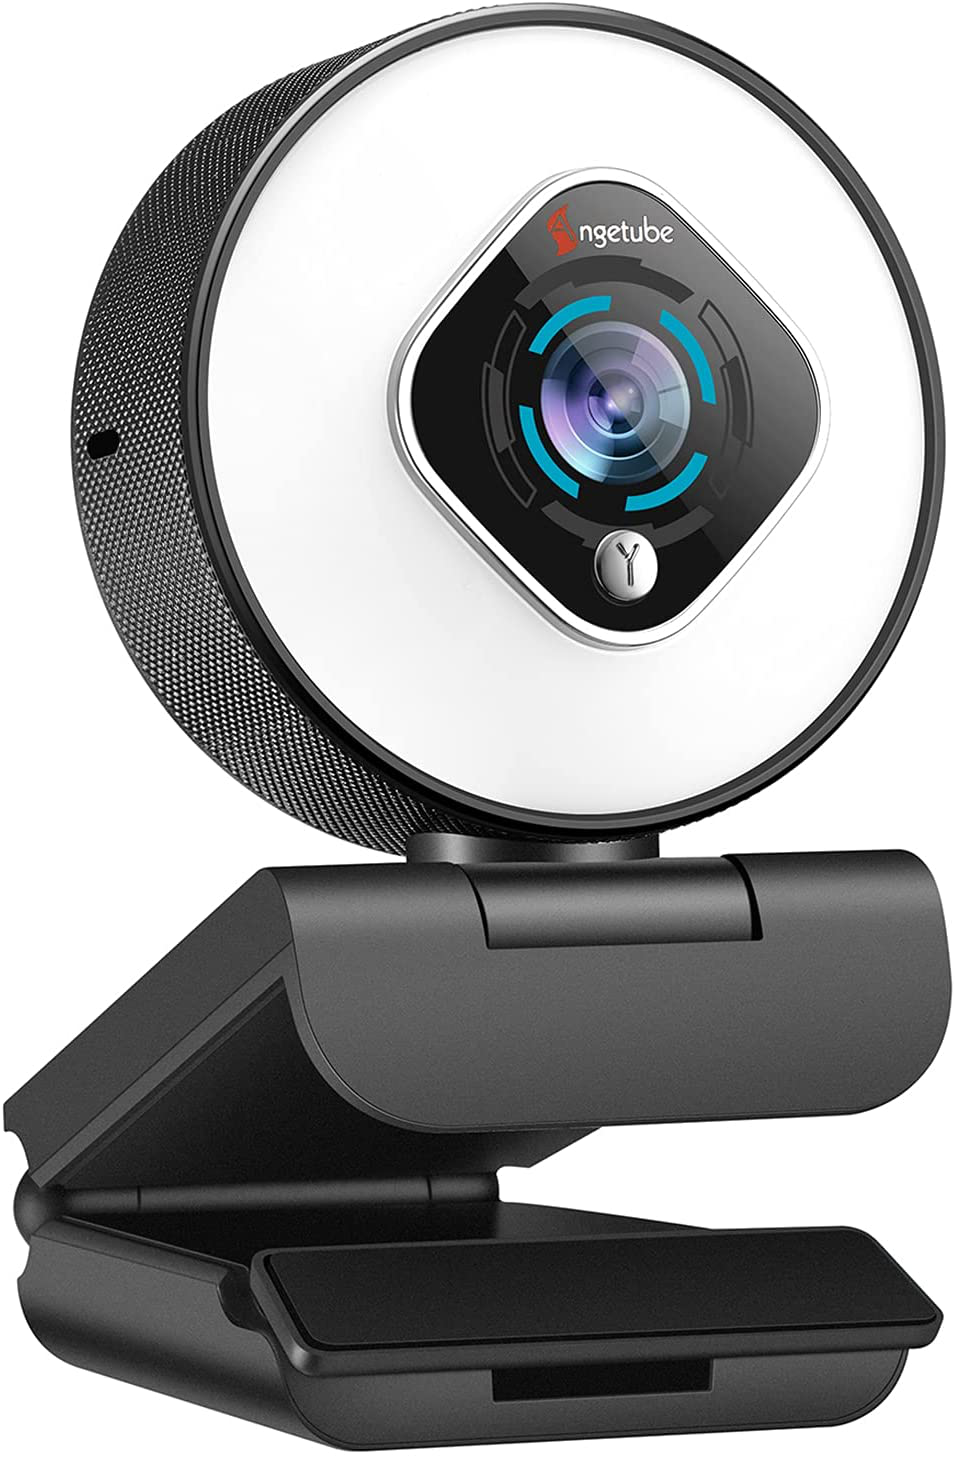 Streaming Webcam with Light - HD 1080P Autofocus Computer Camera with Microphone USB Camera with Digital Zoom for Xbox|Pc|Desktop|Laptop|Gaming|Video Calling